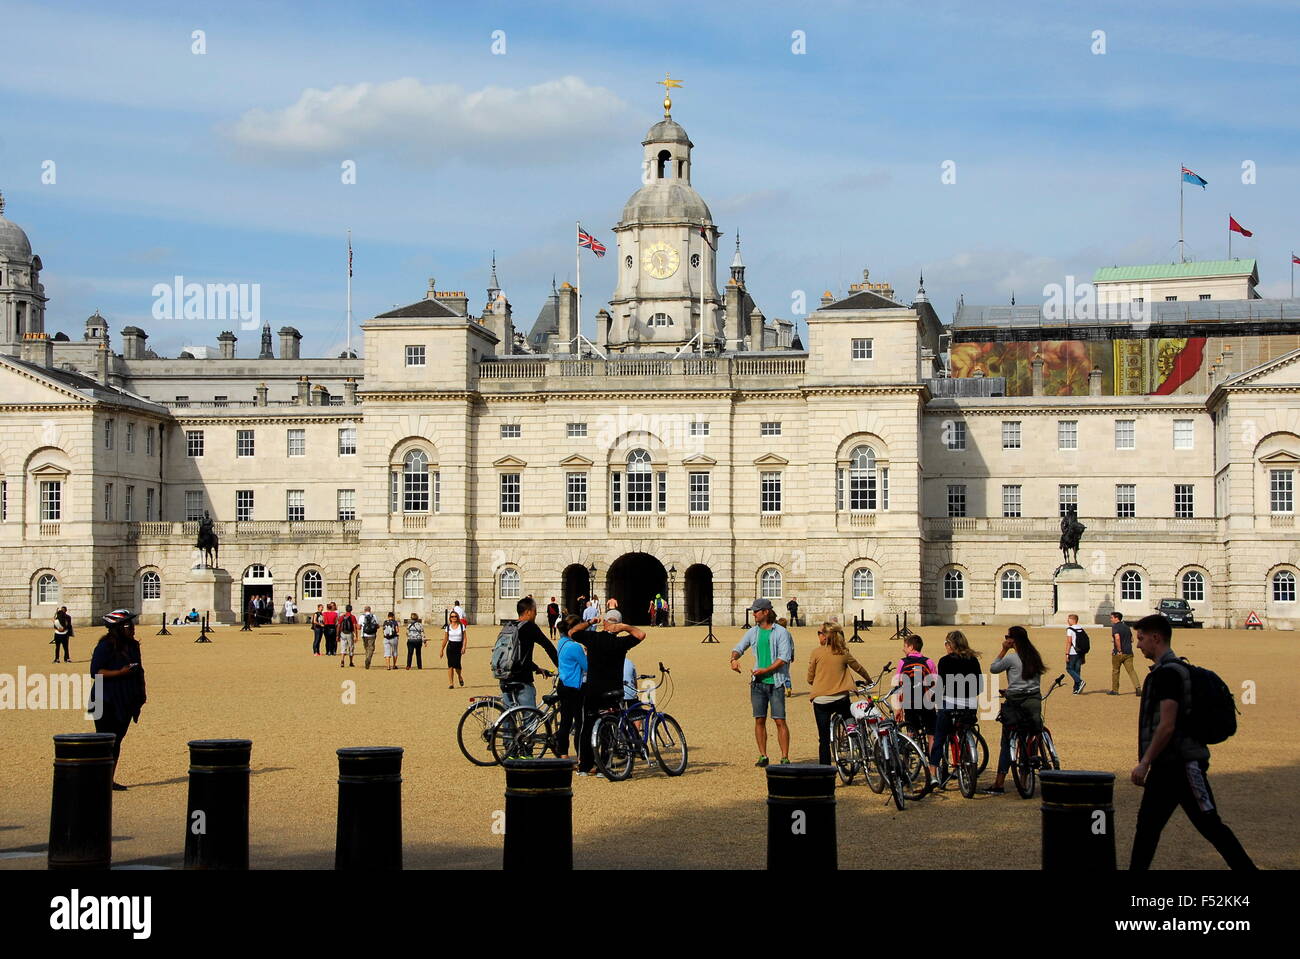 Bicyclists on the Horse Guard Parade grounds in London, England, UK Stock Photo